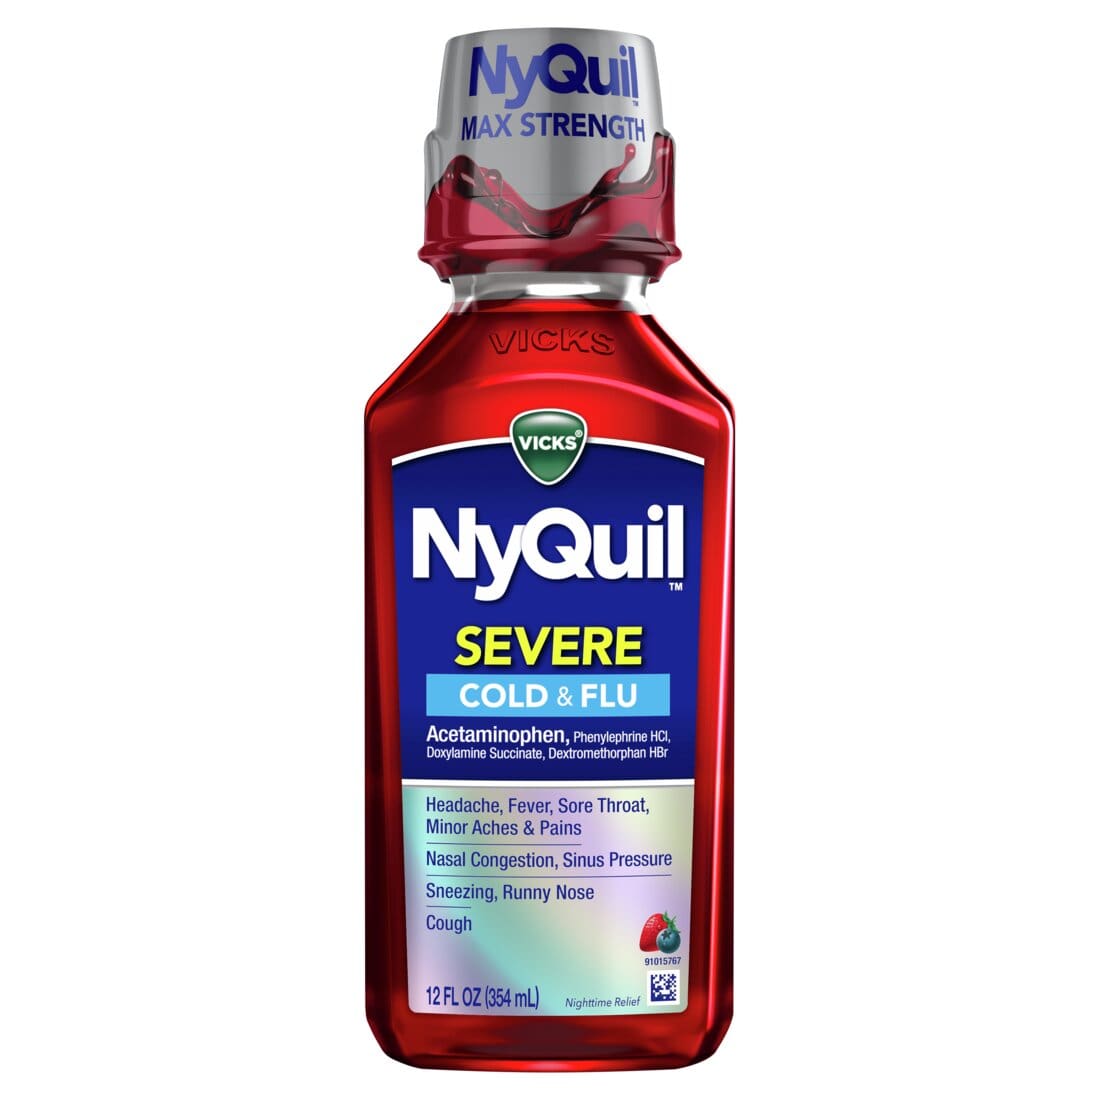 Vicks NyQuil SEVERE Cold Flu and Congestion Medicine Maximum Strength Berry Flavor - 12oz/12pk